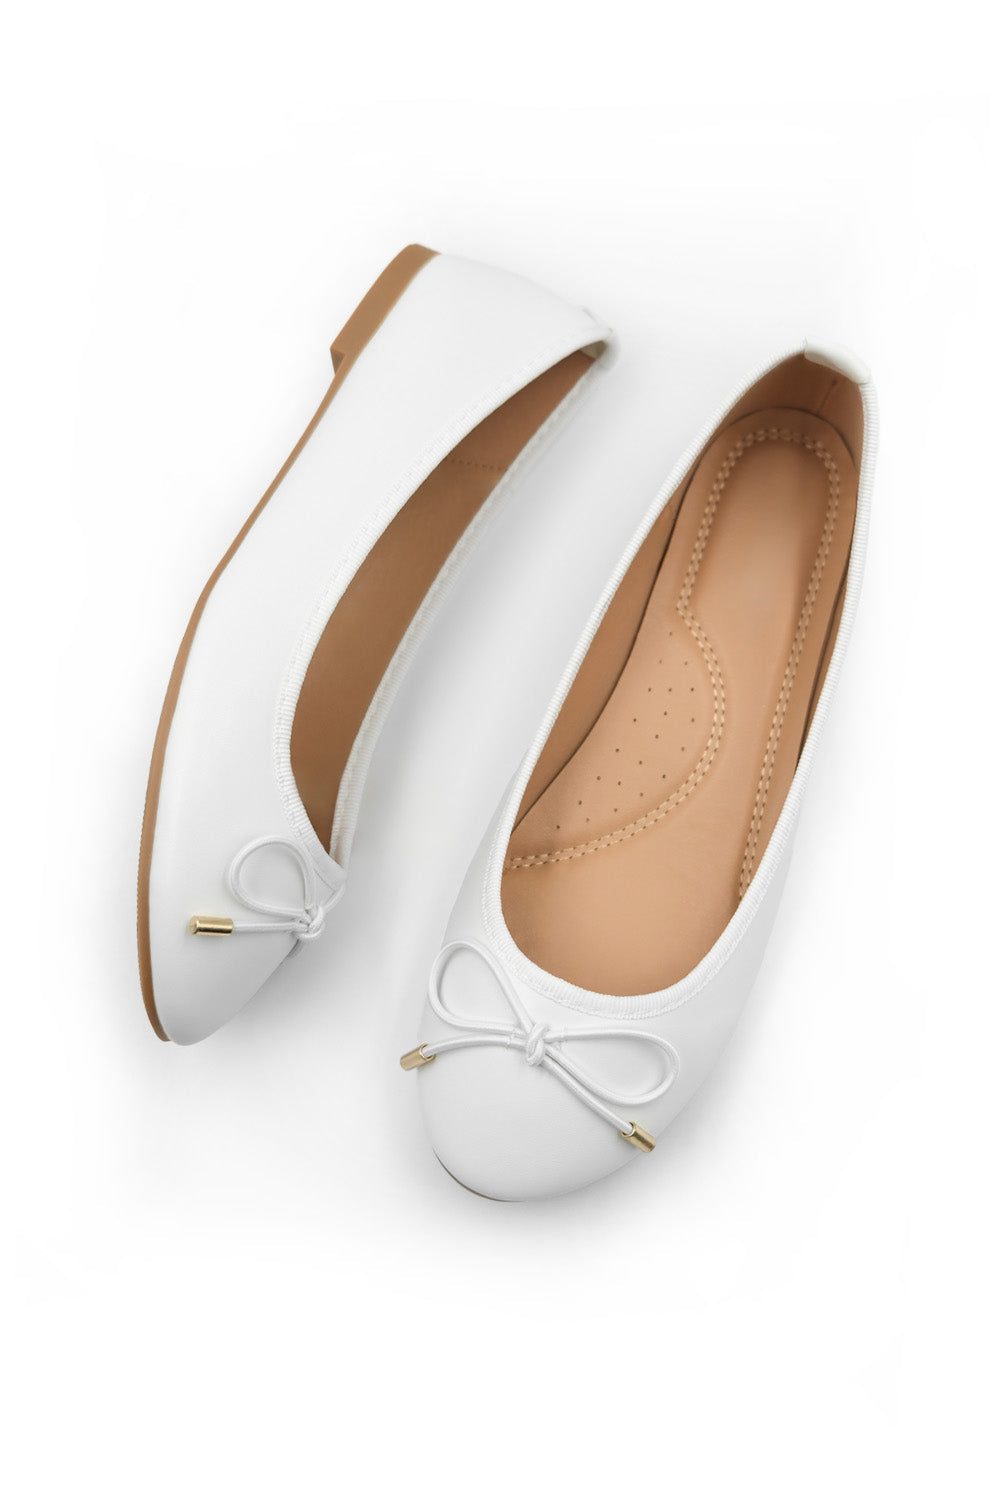 BEXLEY SLIP ON FLAT PUMPS IN WHITE FAUX LEATHER